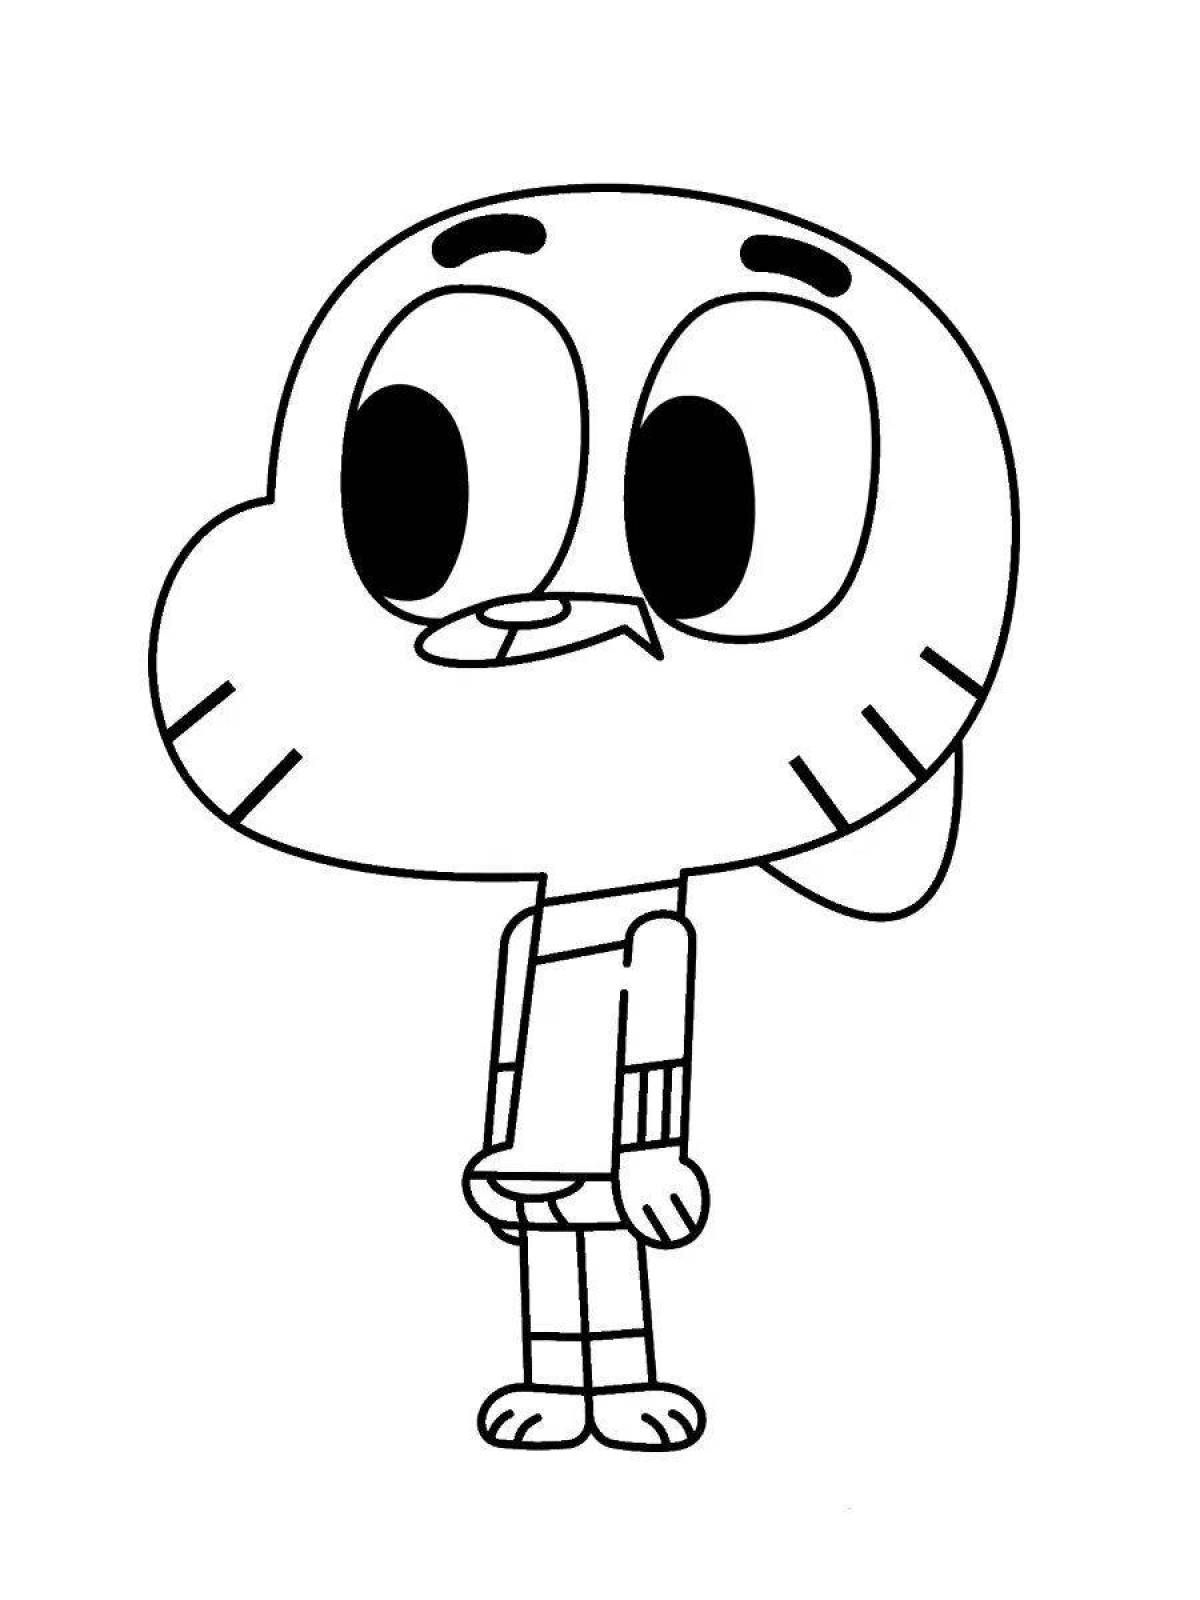 Gumball Charming Coloring Page